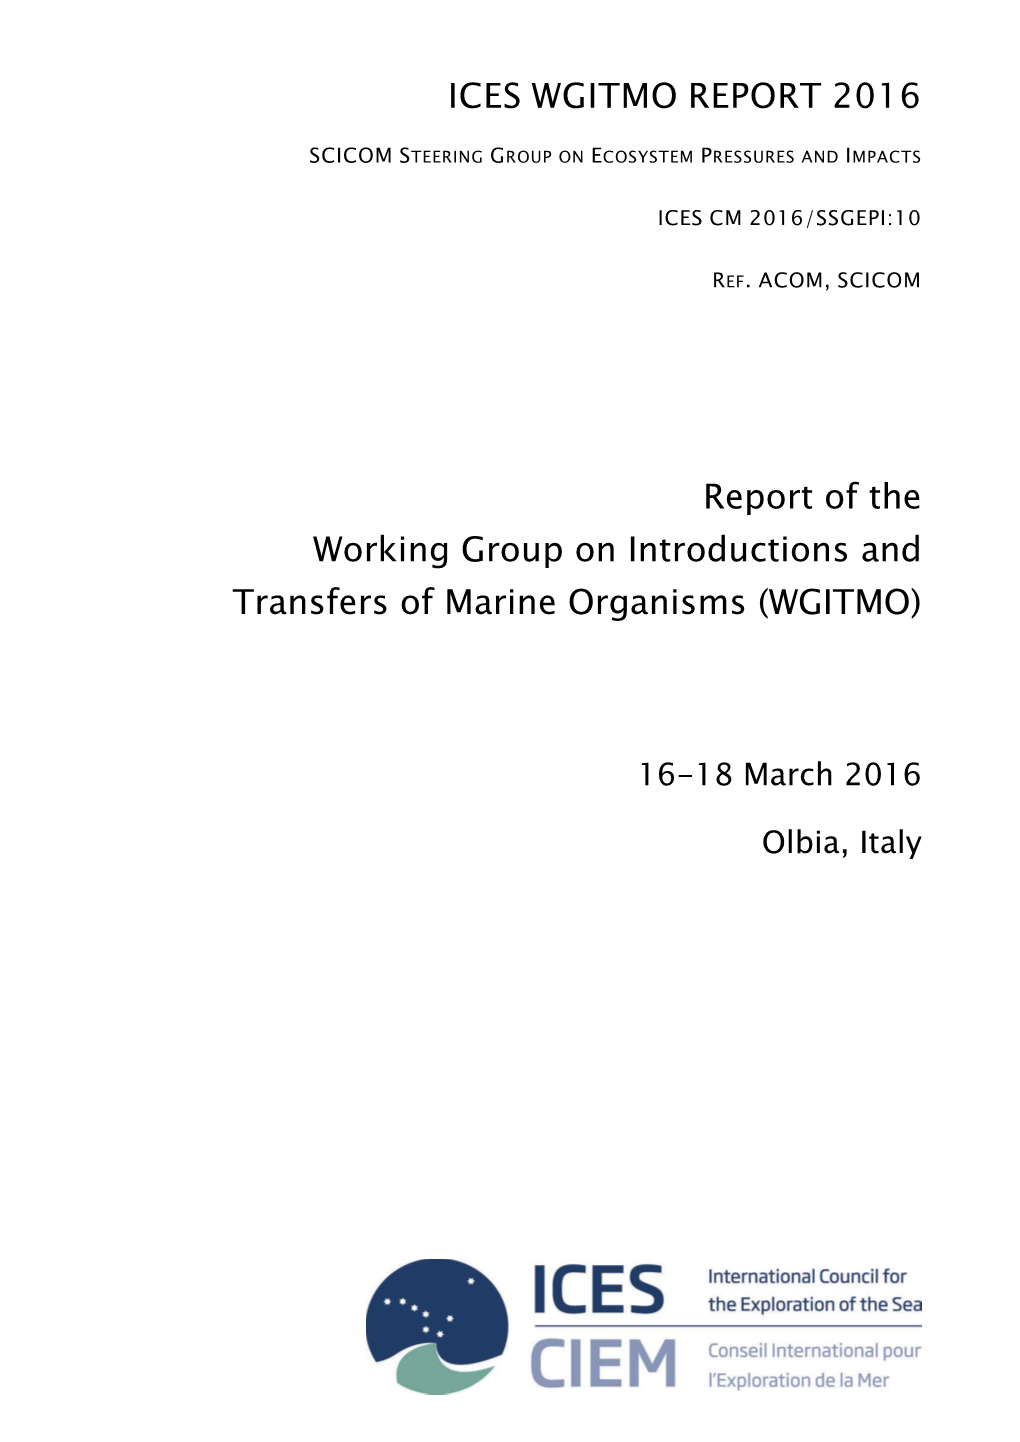 Report of the Working Group on Introductions and Transfers of Marine Organisms (WGITMO)